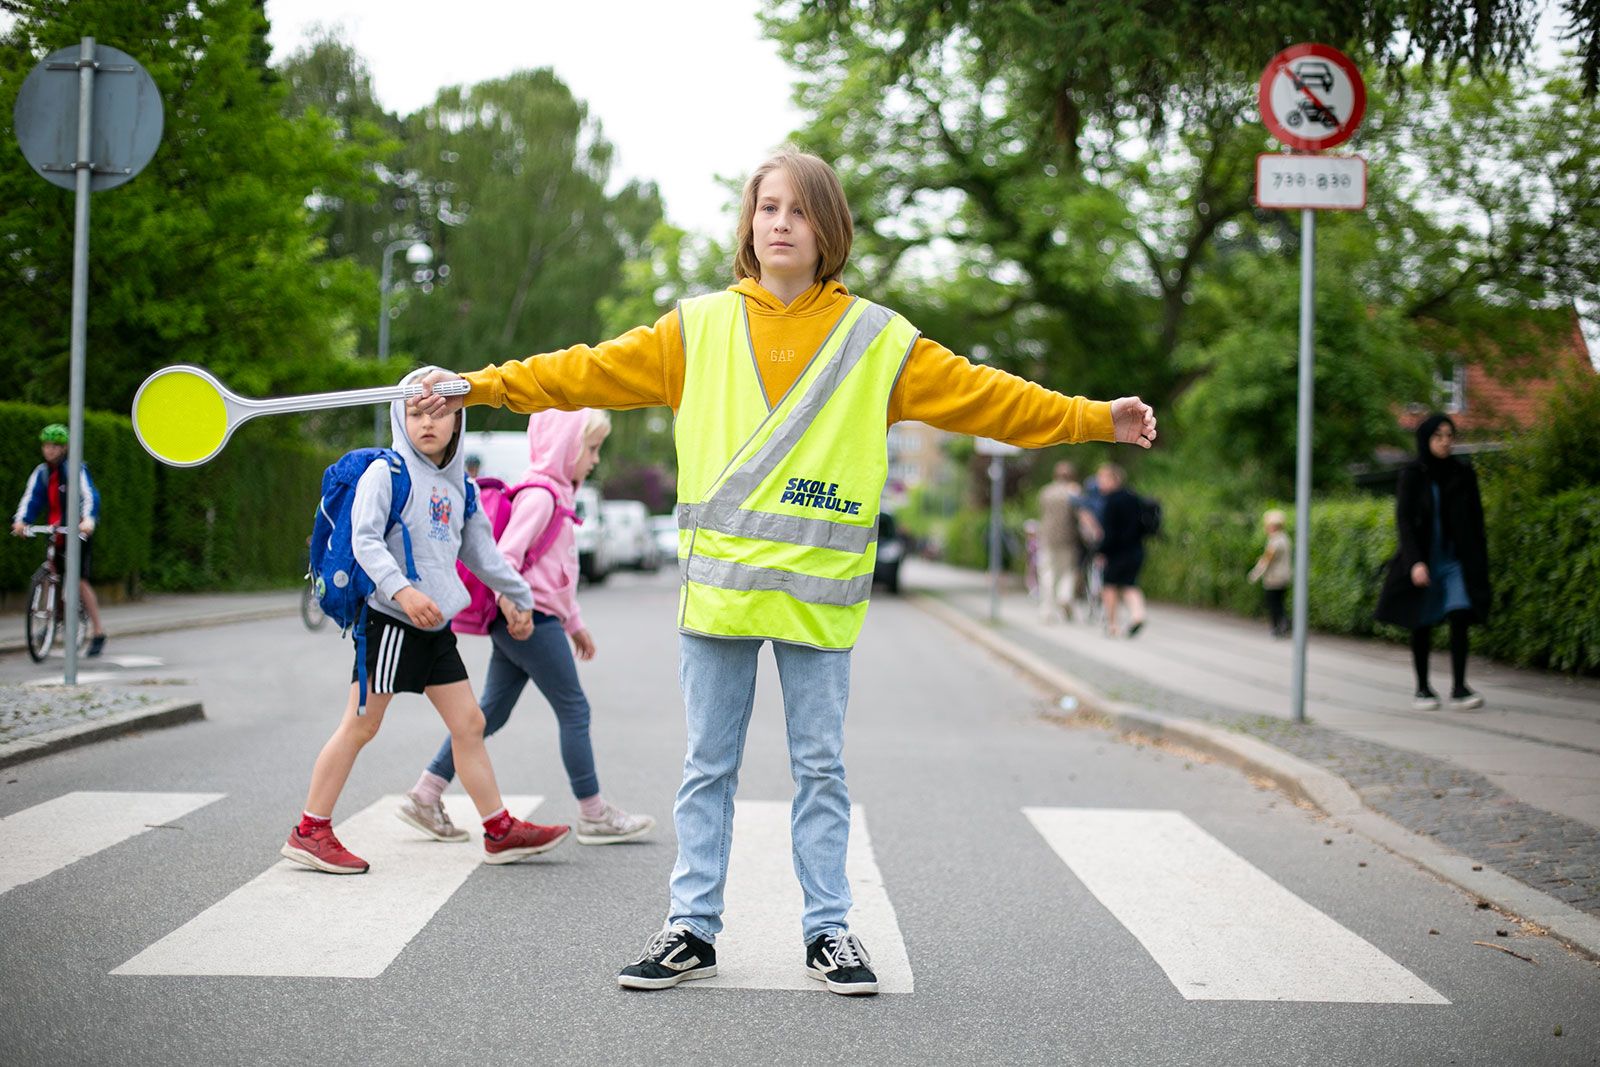 Nearly half of the school patrol’s young people have experienced hostility from road users